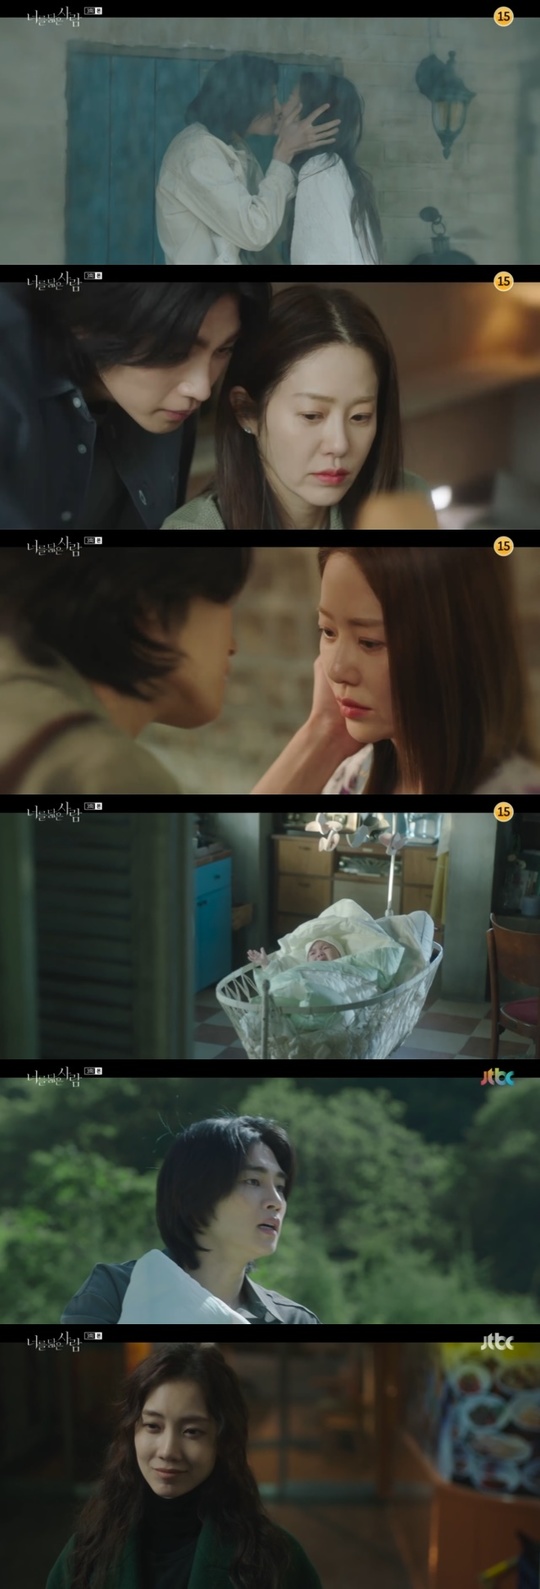 Go Hyun-jung and Jae-young Kims Affair past history has been revealed and the reason for Shin Hyun-bins revenge has been revealed.In the third episode of the JTBC drama The Man Who Resembls You (playplayed by Yu Bora and directed by Lim Hyun-wook), which was broadcast on October 20, Chung Hee-ju (Go Hyun-jung), who recalls the memory of the past, was portrayed in the existence of the old Umizaru (Shin Hyun-bin), who constantly wanders through peaceful daily life.In the past, Chung Hee-ju suffered from depression due to his in-laws who ignored him openly, and the absence of his daughter, An Lisa (Kim Soo-an), who studied abroad at a young age.Chung Hee-ju found a German language institute with a breakthrough, and met with Umizau, an art major who is preparing to study in Germany.Chung Hee-ju became close to Umizaru, a struggling college student, and became an actor in art.Then one day, Umizaru could not proceed with his class for a while because of his grandfather.It was Baro Seo Woo Jae (Jae-young Kim Boone).Seo Woo-jae showed a good feeling to Chung Hee-ju first.According to the old Umizaru, he never draws a portrait, and for the first time he painted the face of Chung Hee-ju in his notebook.Then he told Chung Hee-ju, The left side of the face is more beautiful, the outline coming down from the forehead to the clown chin. It is very courageous.Eventually, they had an inappropriate relationship. In the memory of Chung Hee-ju, the memories of Seo Woo Jae were rare.Chung Hee-ju and Seo Woo Jae enjoyed dating, shared a hug and kissed.The relationship between the two has been long overdue, even shocking viewers with the suspicion that Chung Hee-jus young son, An Ho-su (Kim Dong-ha), may be the blood of Seo Woo-jae.But Chung Hee-ju blamed the whole thing on the old Umizaru.Chung Hee-ju avoided all of his responsibilities, saying: The beginning of all these stories is what you brought yourself to.Umizaru continued his revenge on the unreflective Chung Hee-ju.Umizaru deliberately filmed the video of himself talking with Chung Hee-jus husband Ahn Hyun-sung (Choi Won-young), and continued his meeting with Chung Hee-jus brother Jung Sun-woo (Shin Dong-wook), and also made a relationship with Chung Hee-jus Friend Lee Dong-mi (Park Sung-yeon).In addition, the former Umizaru deliberately wanted to hold an exhibition of Seo Woo next to the solo exhibition Baro of Chung Hee-ju.Later, Umizaru took out the name of Seo Woo Jae to Chung Hee-ju, who came to make sure he was distanced from himself.Woo Jae-jae, senior asks you to say hello to your sister, and you want to see her a lot, said former Umizaru, laughing.In the trailer released behind this horse, Seo Woo Jae, who was unconscious, was drawn in front of Chung Hee-ju, causing tension.